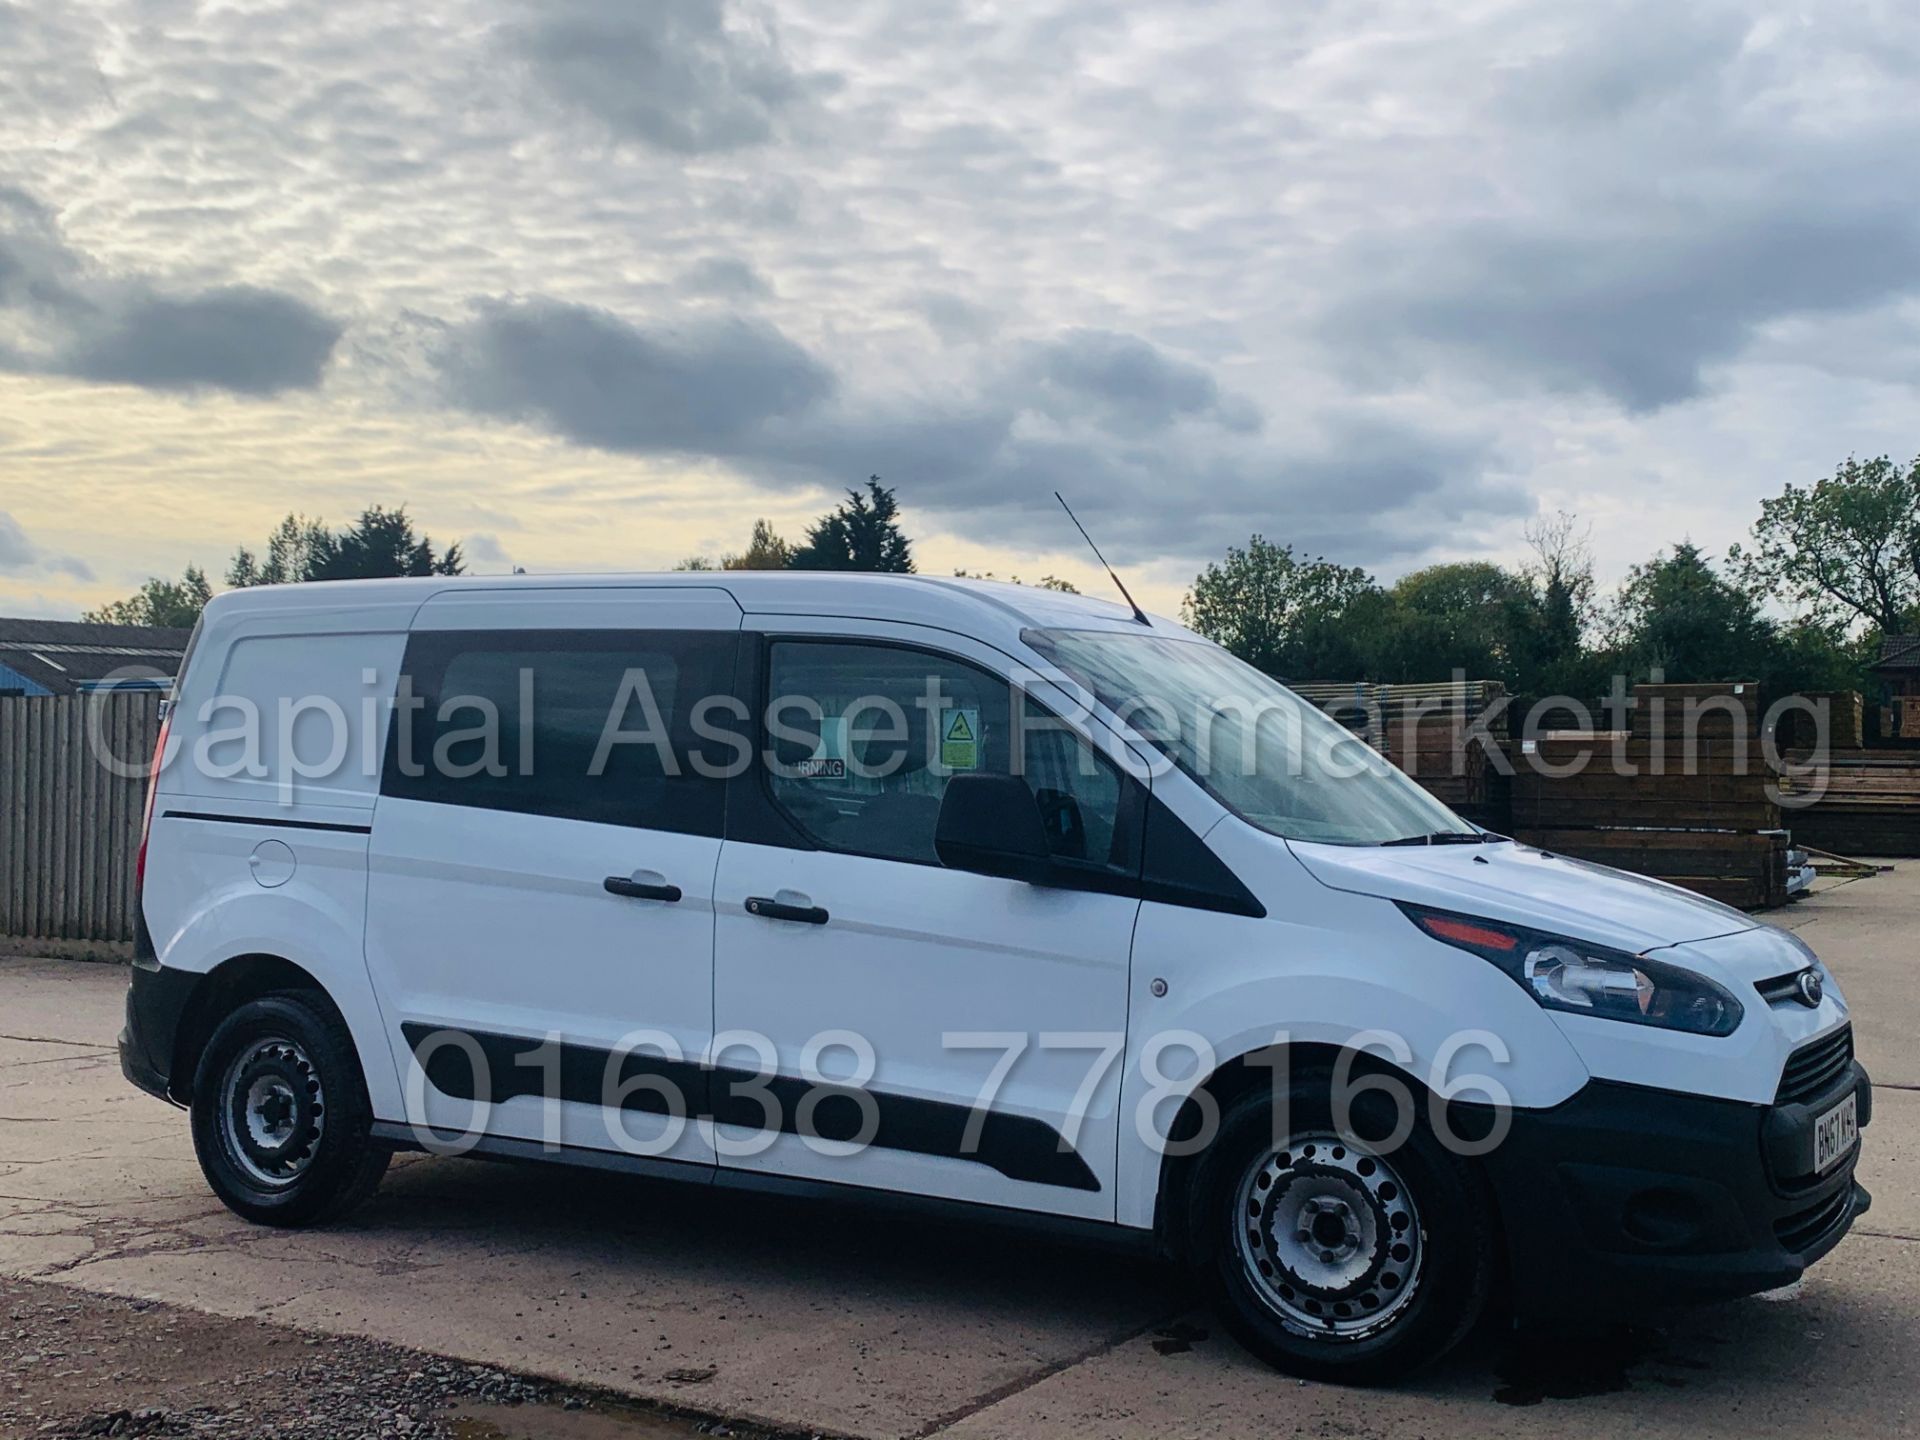 (ON SALE) FORD TRANSIT CONNECT *LWB- 5 SEATER CREW VAN* (2018 - EURO 6) 1.5 TDCI *AIR CON* (1 OWNER) - Image 12 of 40